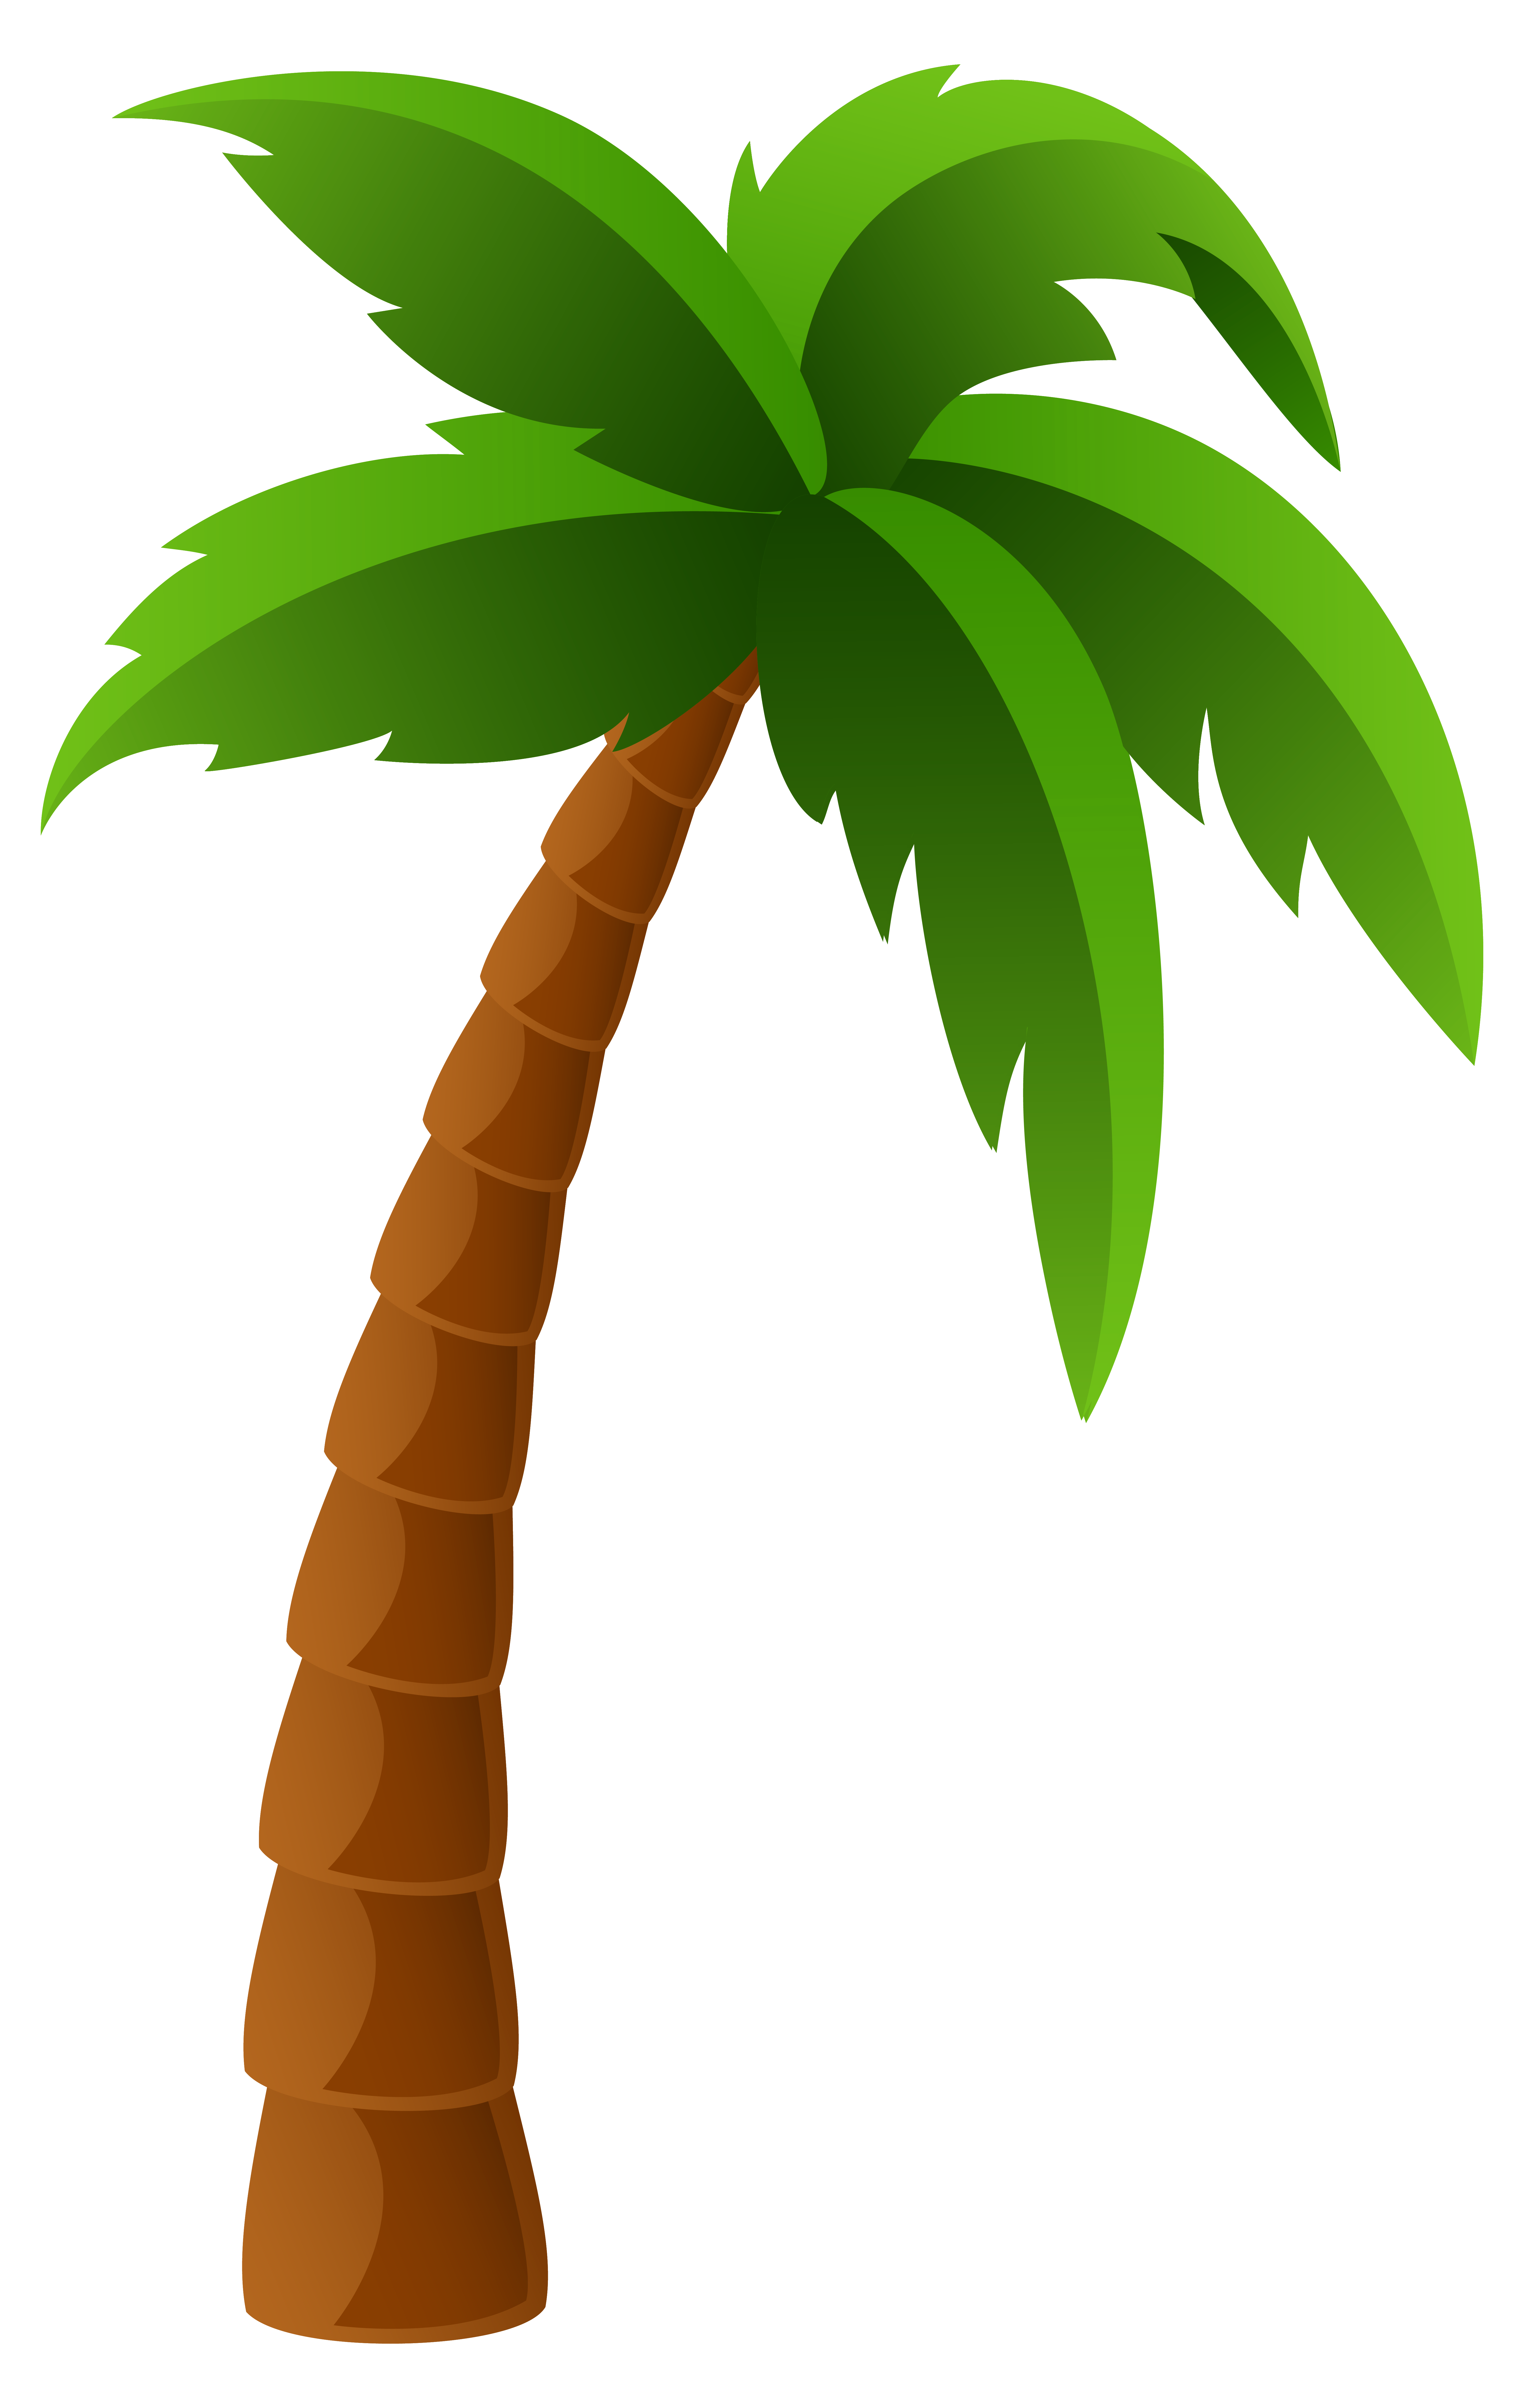 Palm Tree PNG Image Clipart | Gallery Yopriceville - High-Quality ...